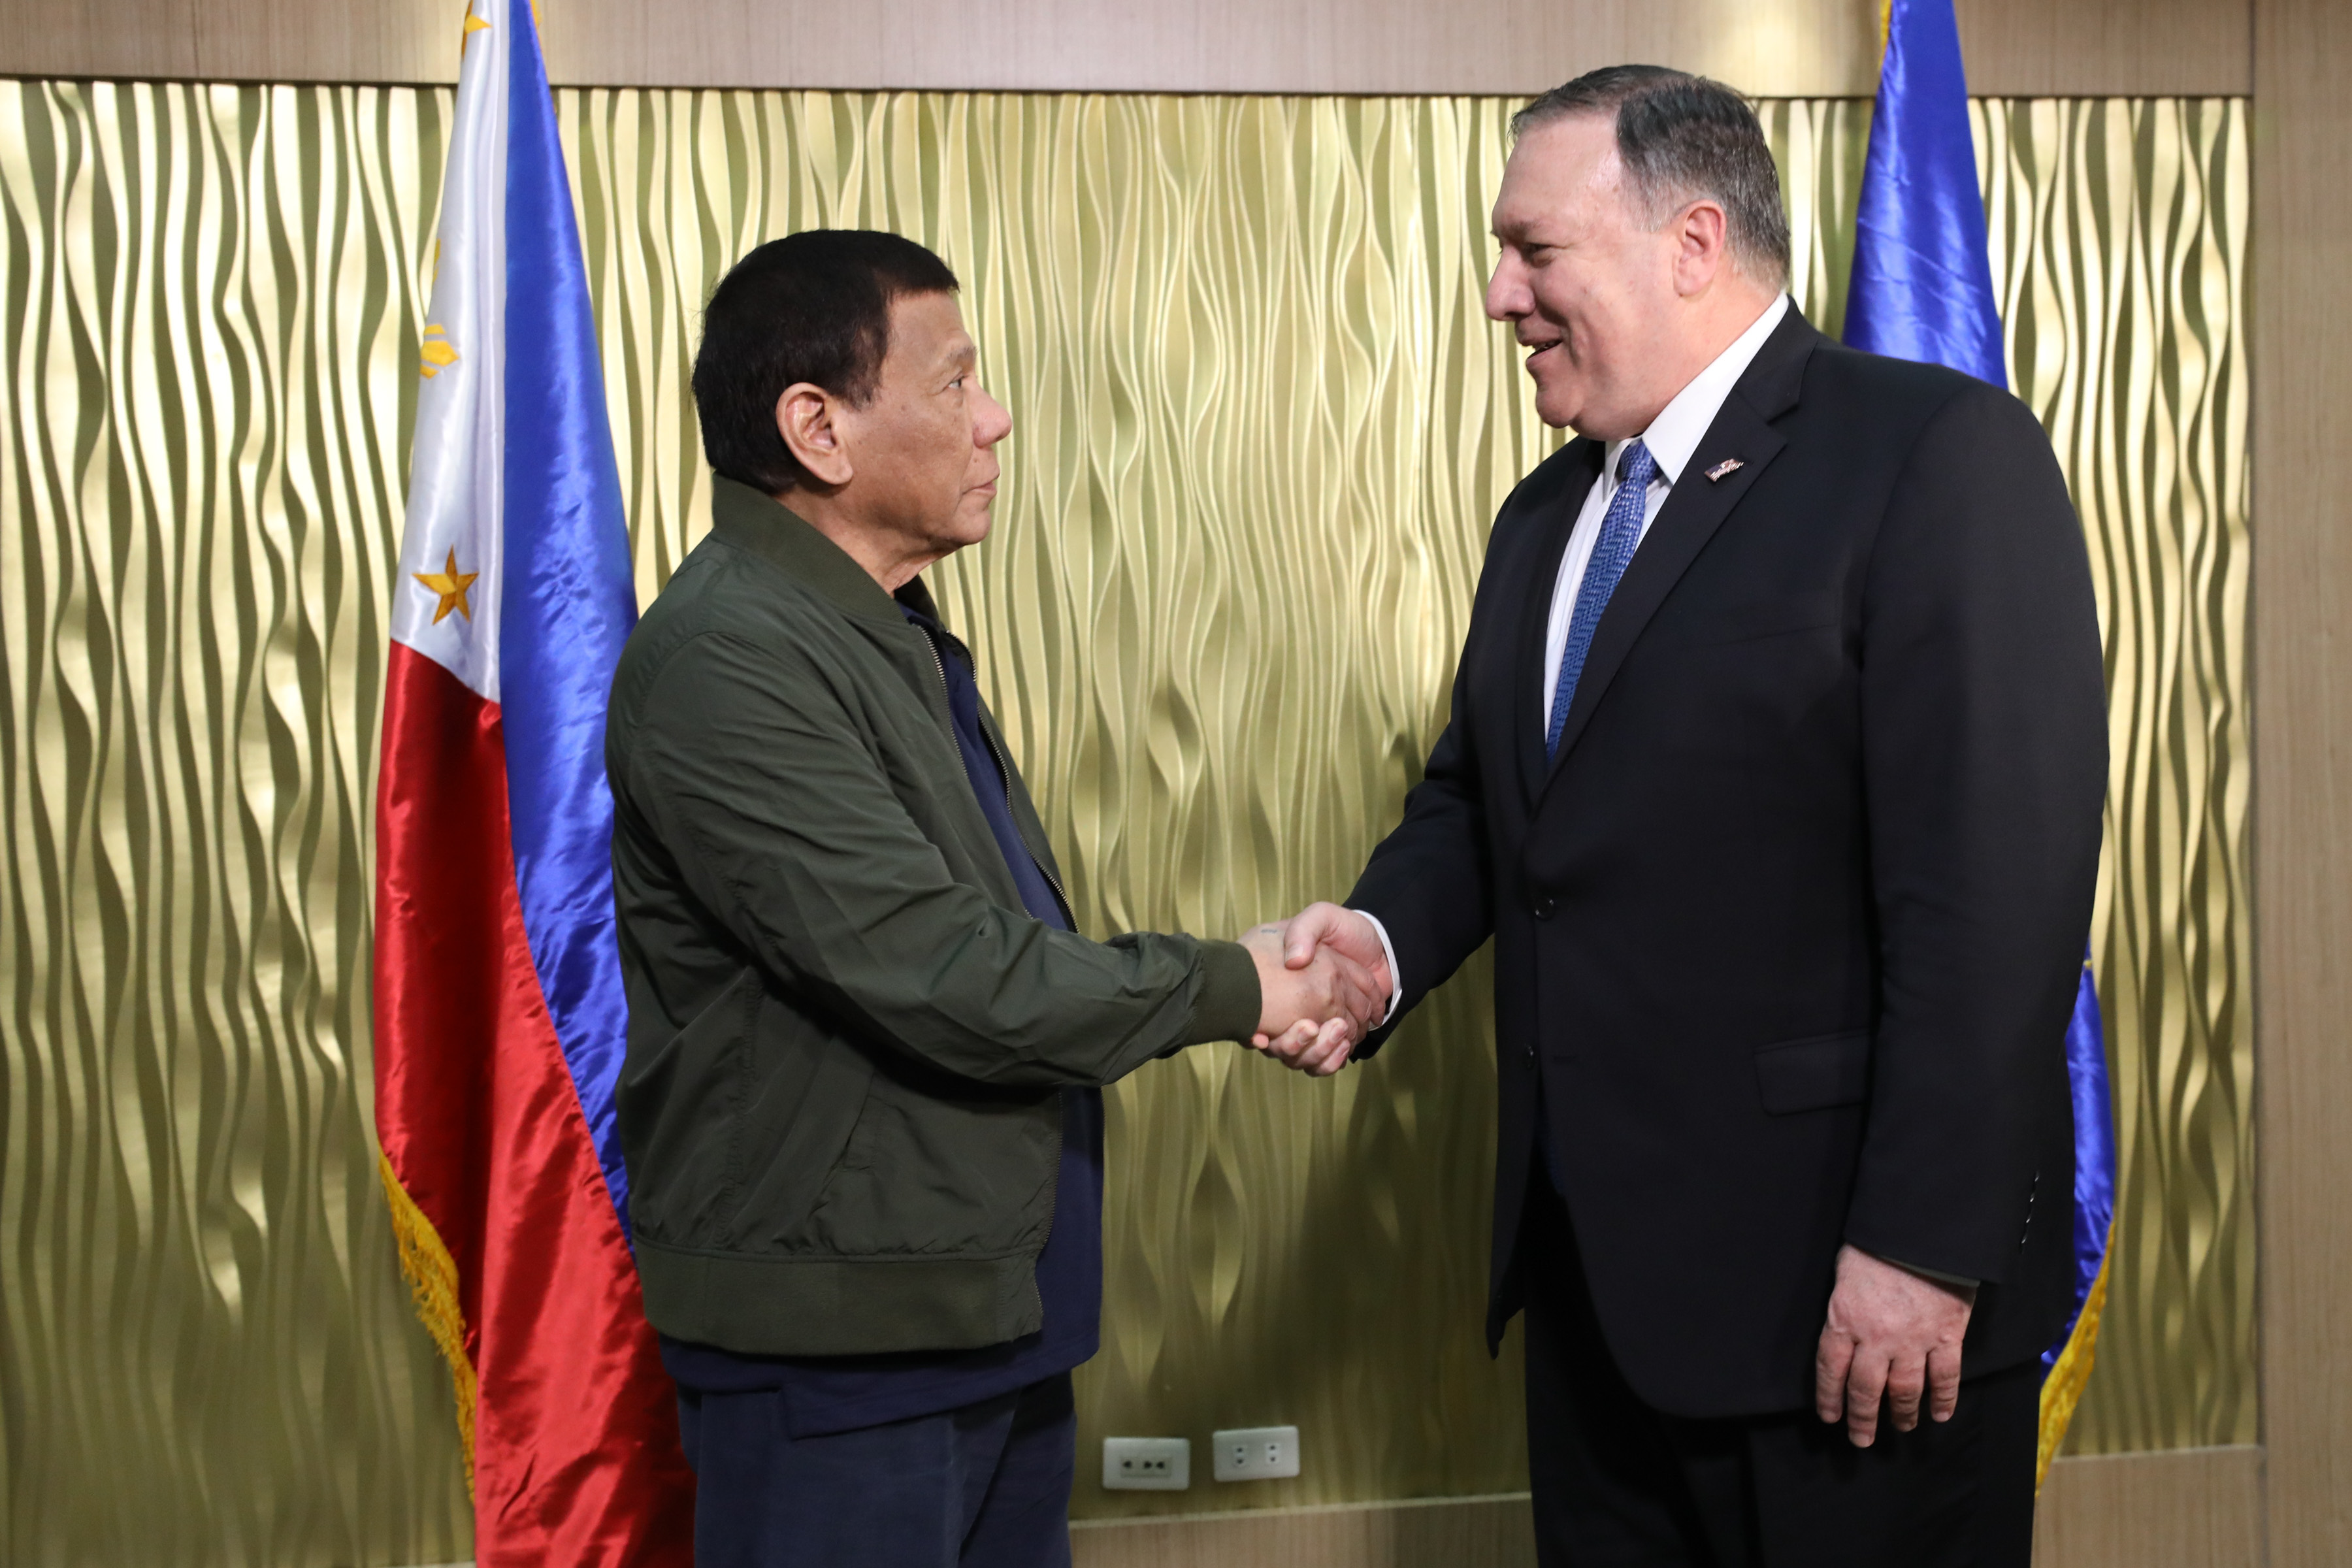 Panelo recounts Pompeo telling Duterte: 'You're just like our president'